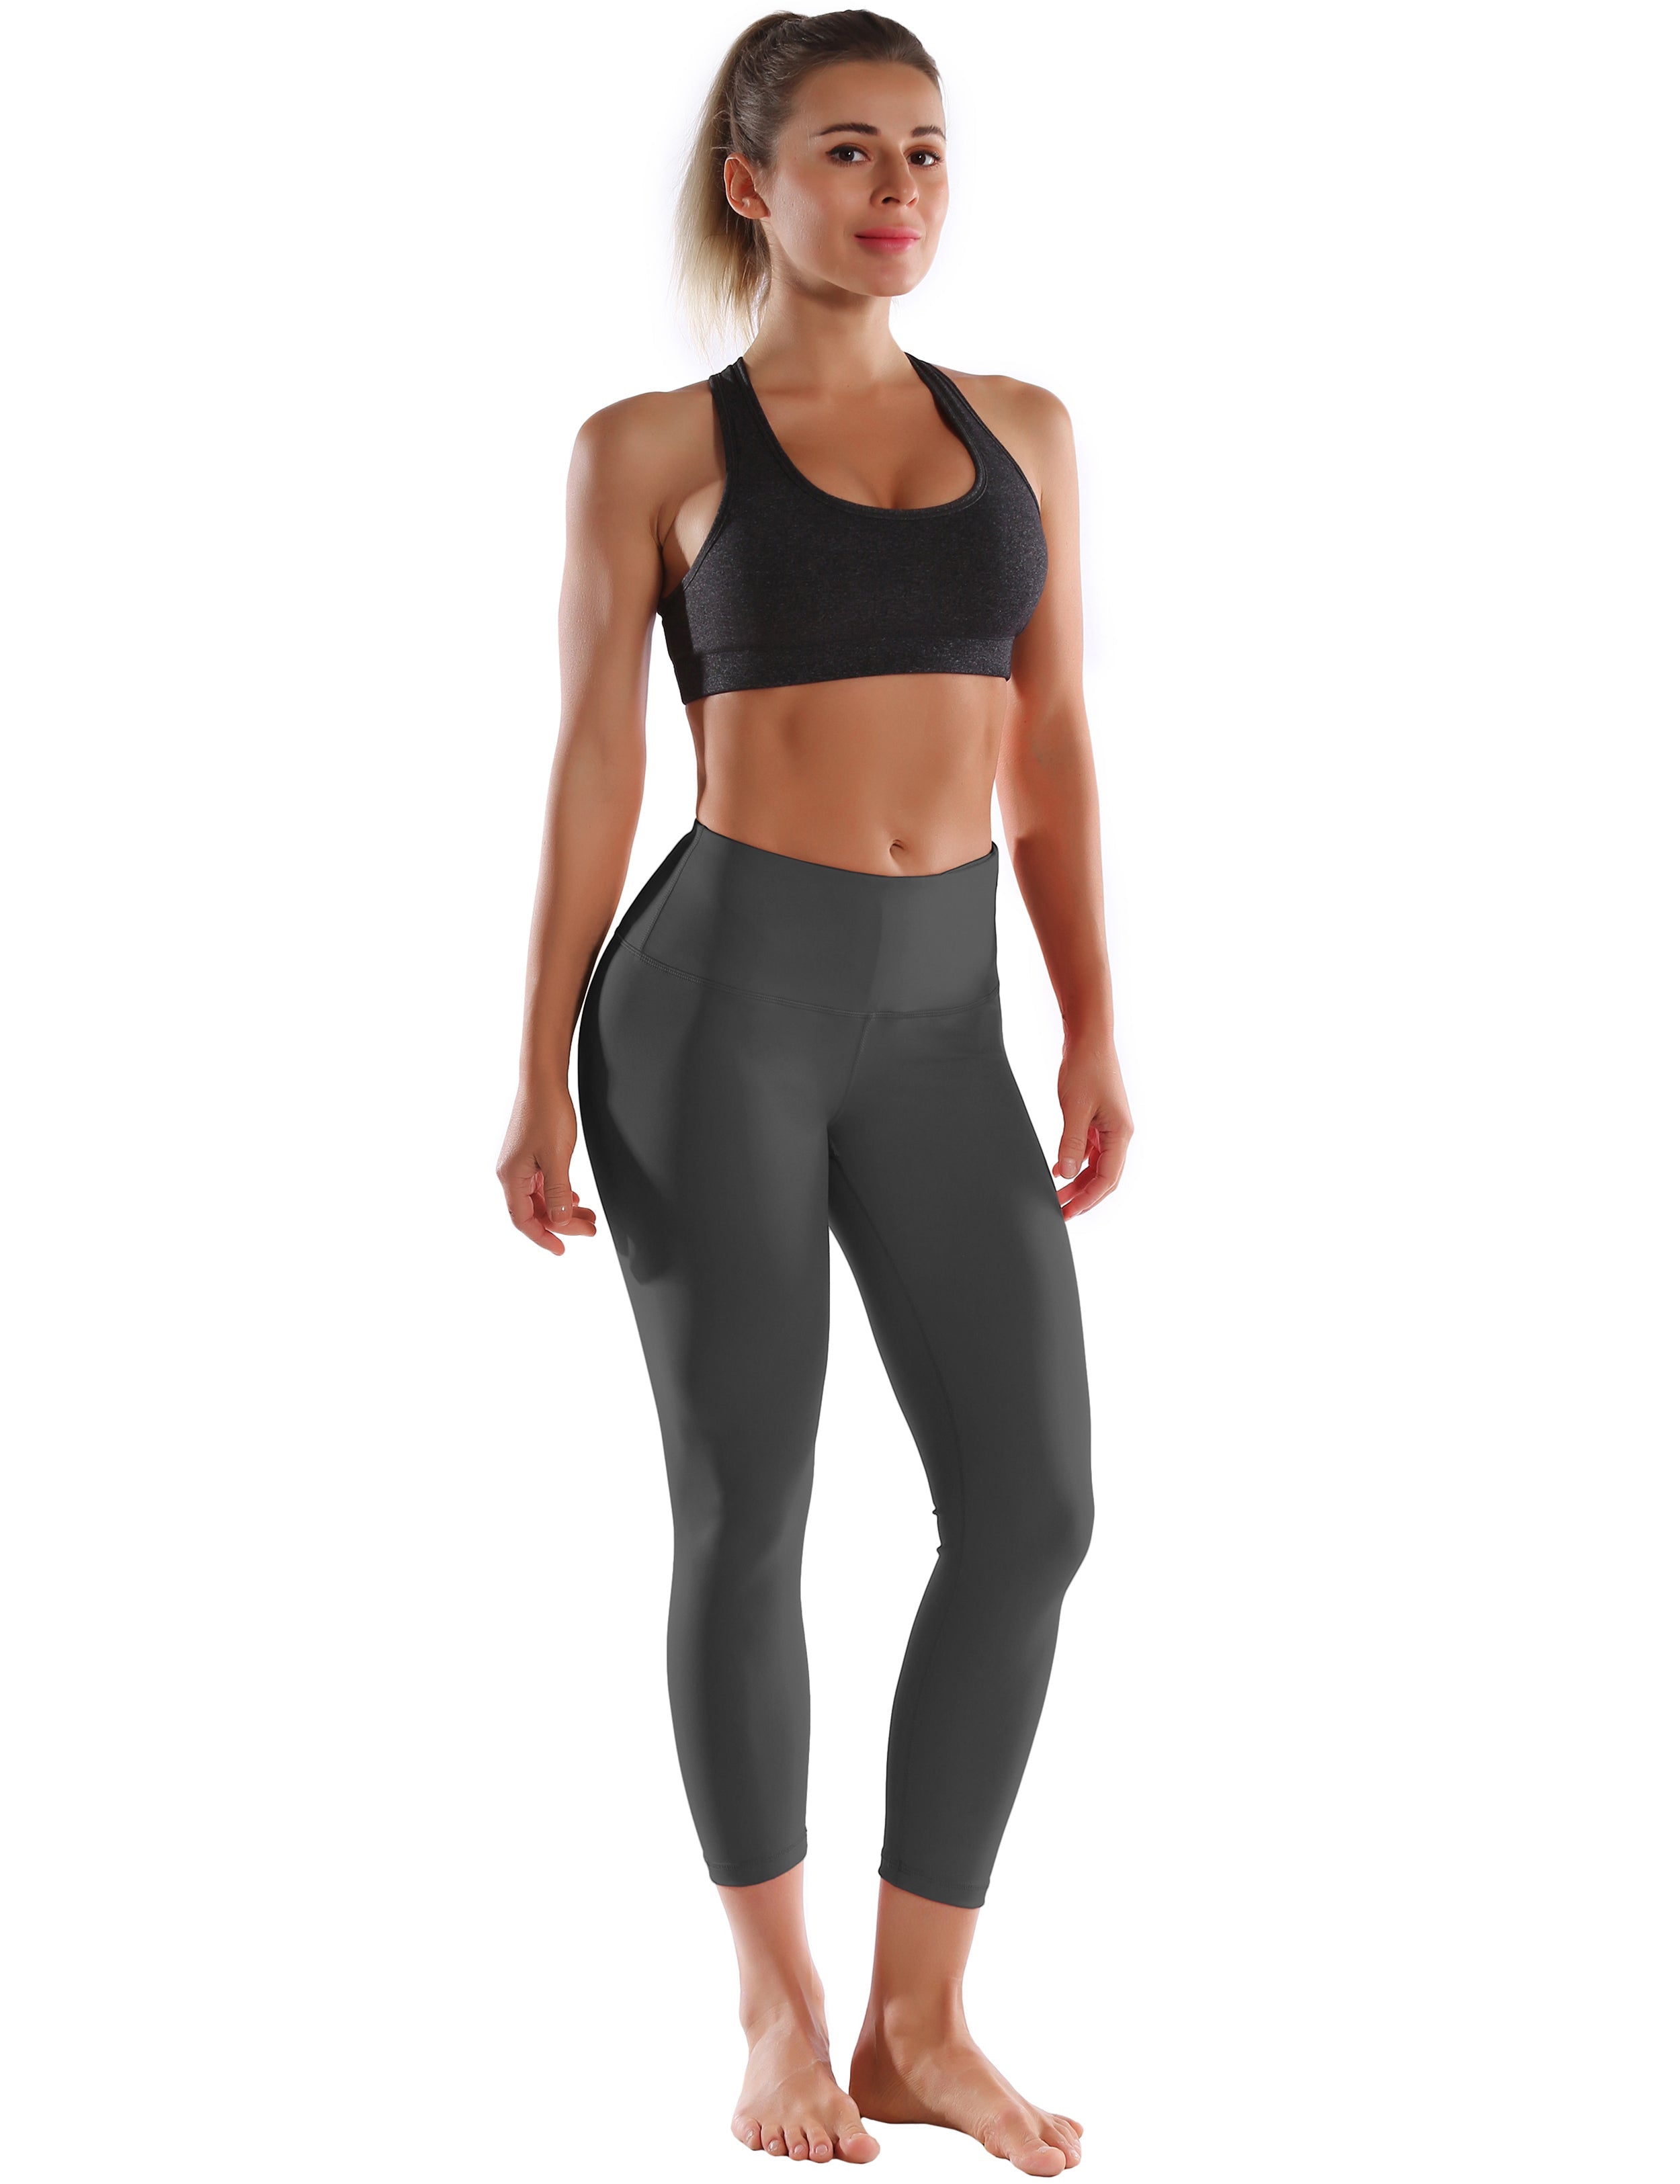 22" High Waist Crop Tight Capris shadowcharcoal 75%Nylon/25%Spandex Fabric doesn't attract lint easily 4-way stretch No see-through Moisture-wicking Tummy control Inner pocket